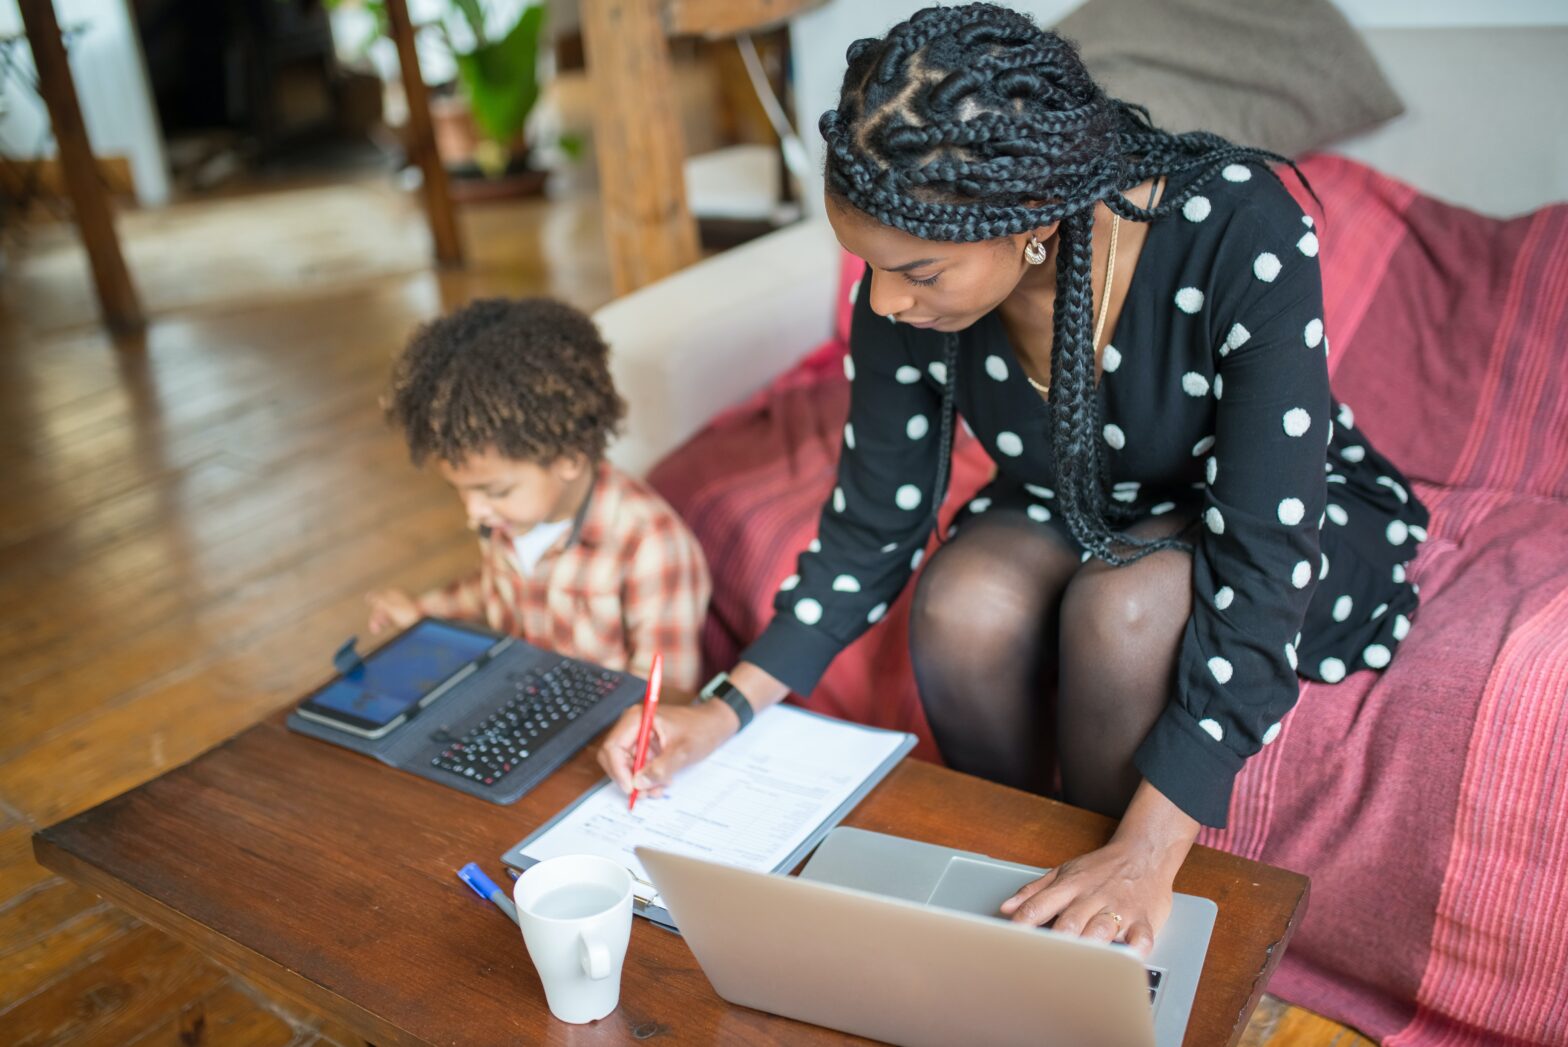 Mom Lives Double Life After Working Remotely From Africa Without Permission